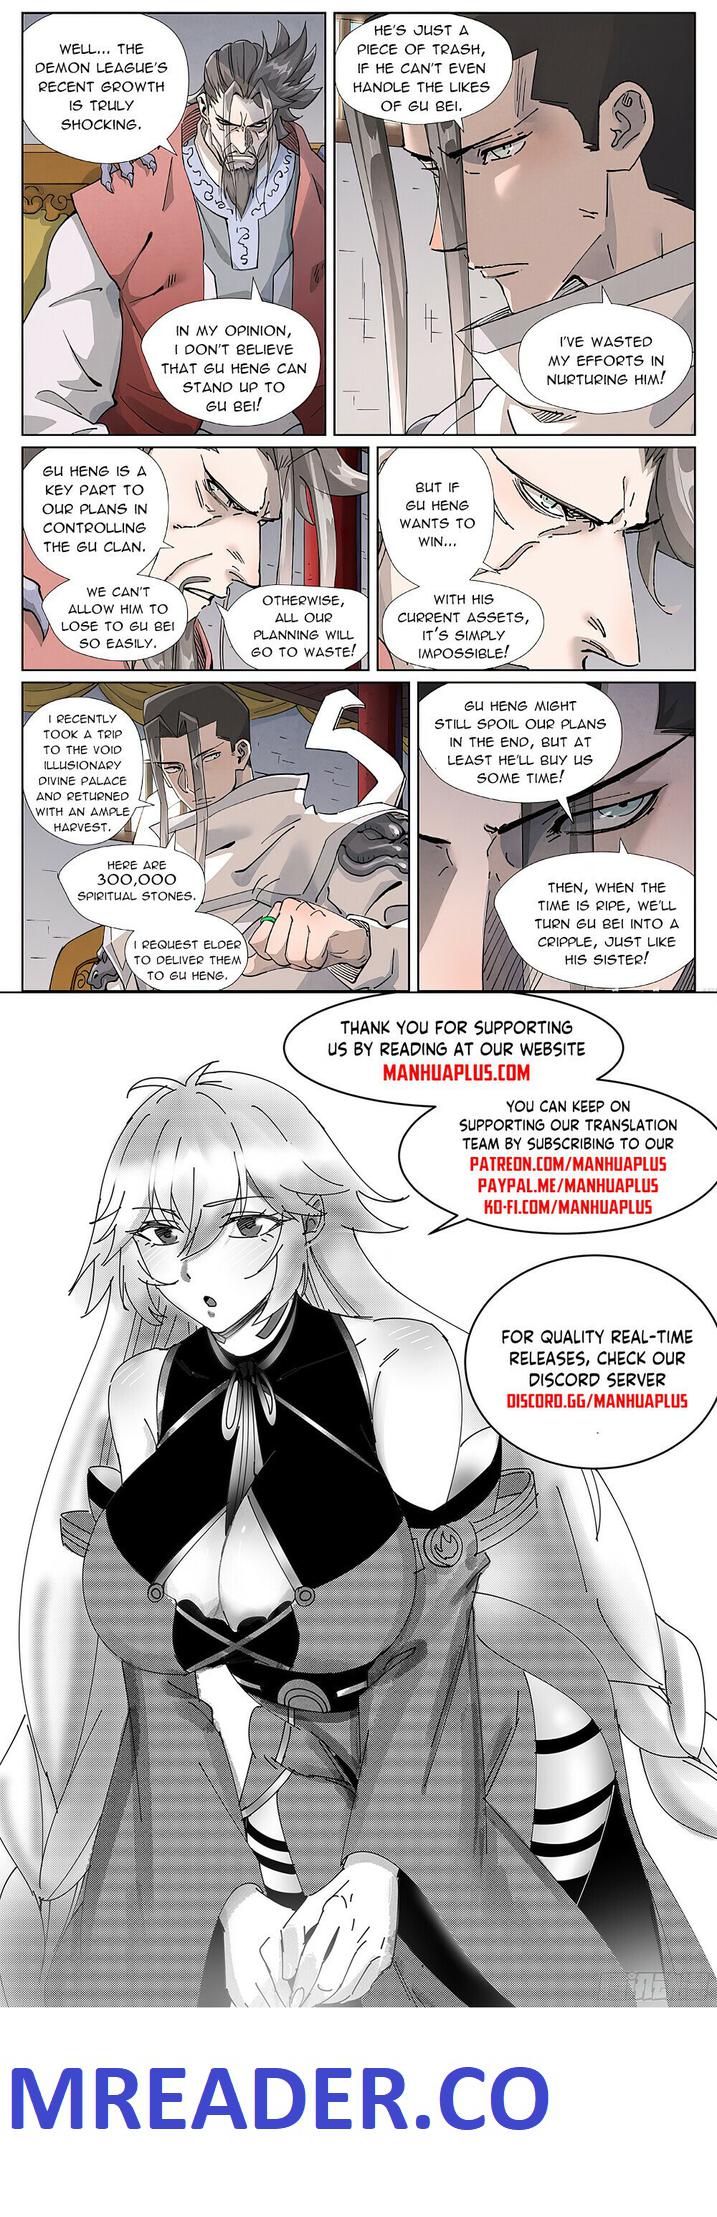 Tales of Demons and Gods Chapter 410-6-eng-li - Page 10